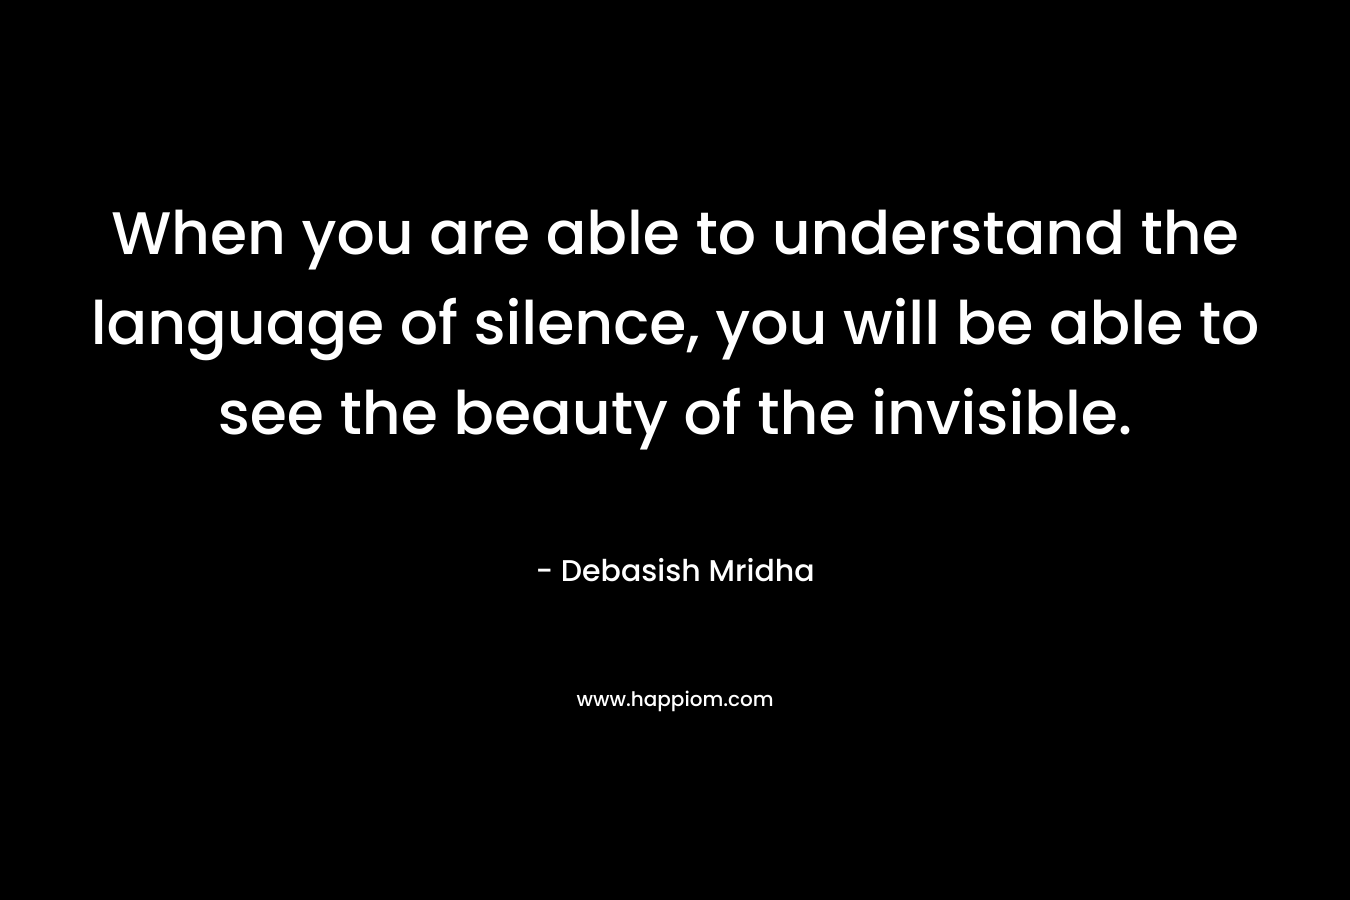 When you are able to understand the language of silence, you will be able to see the beauty of the invisible.